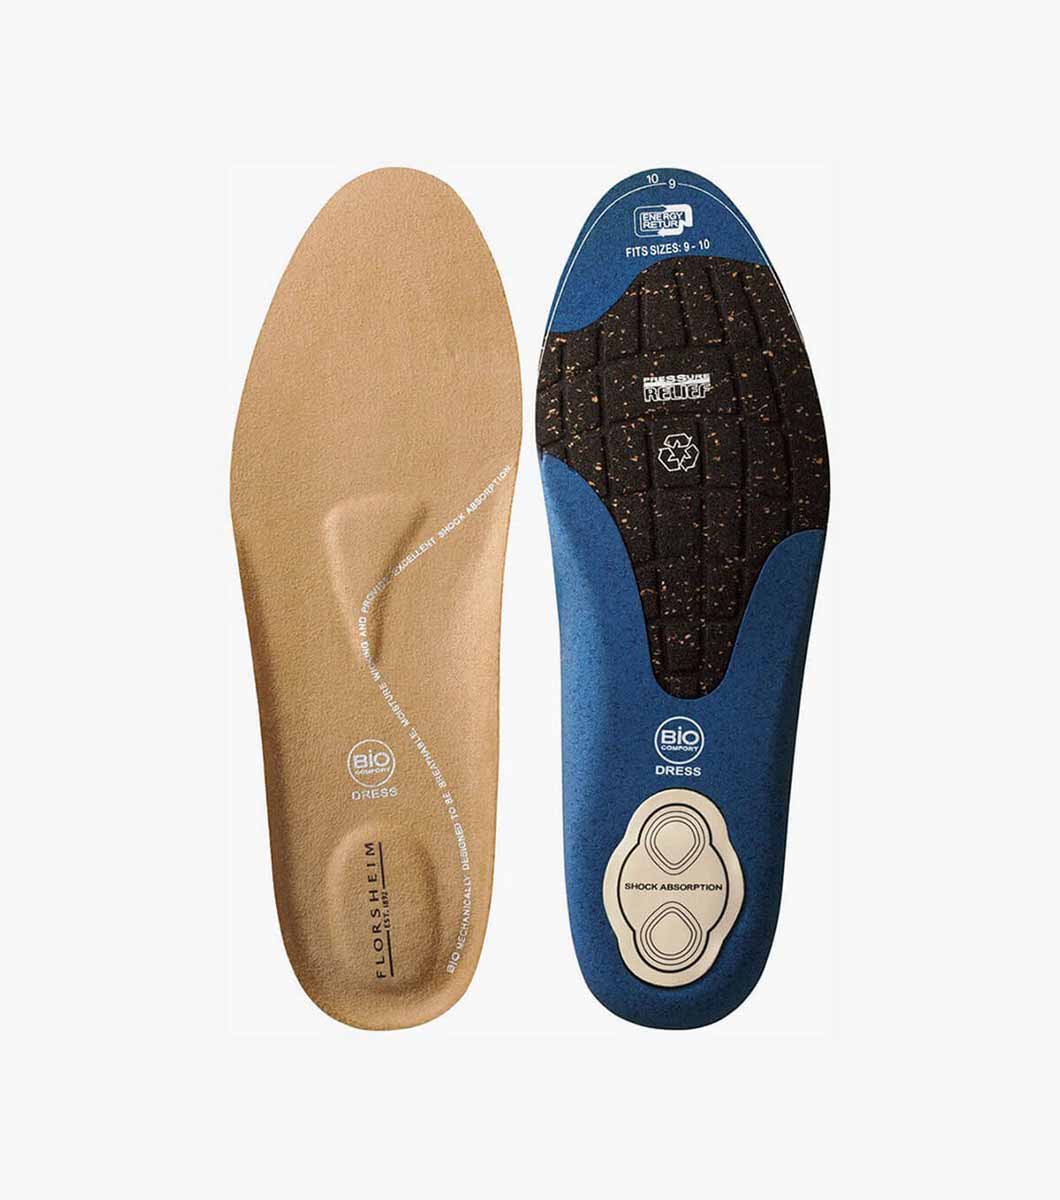 comfort insoles for dress shoes